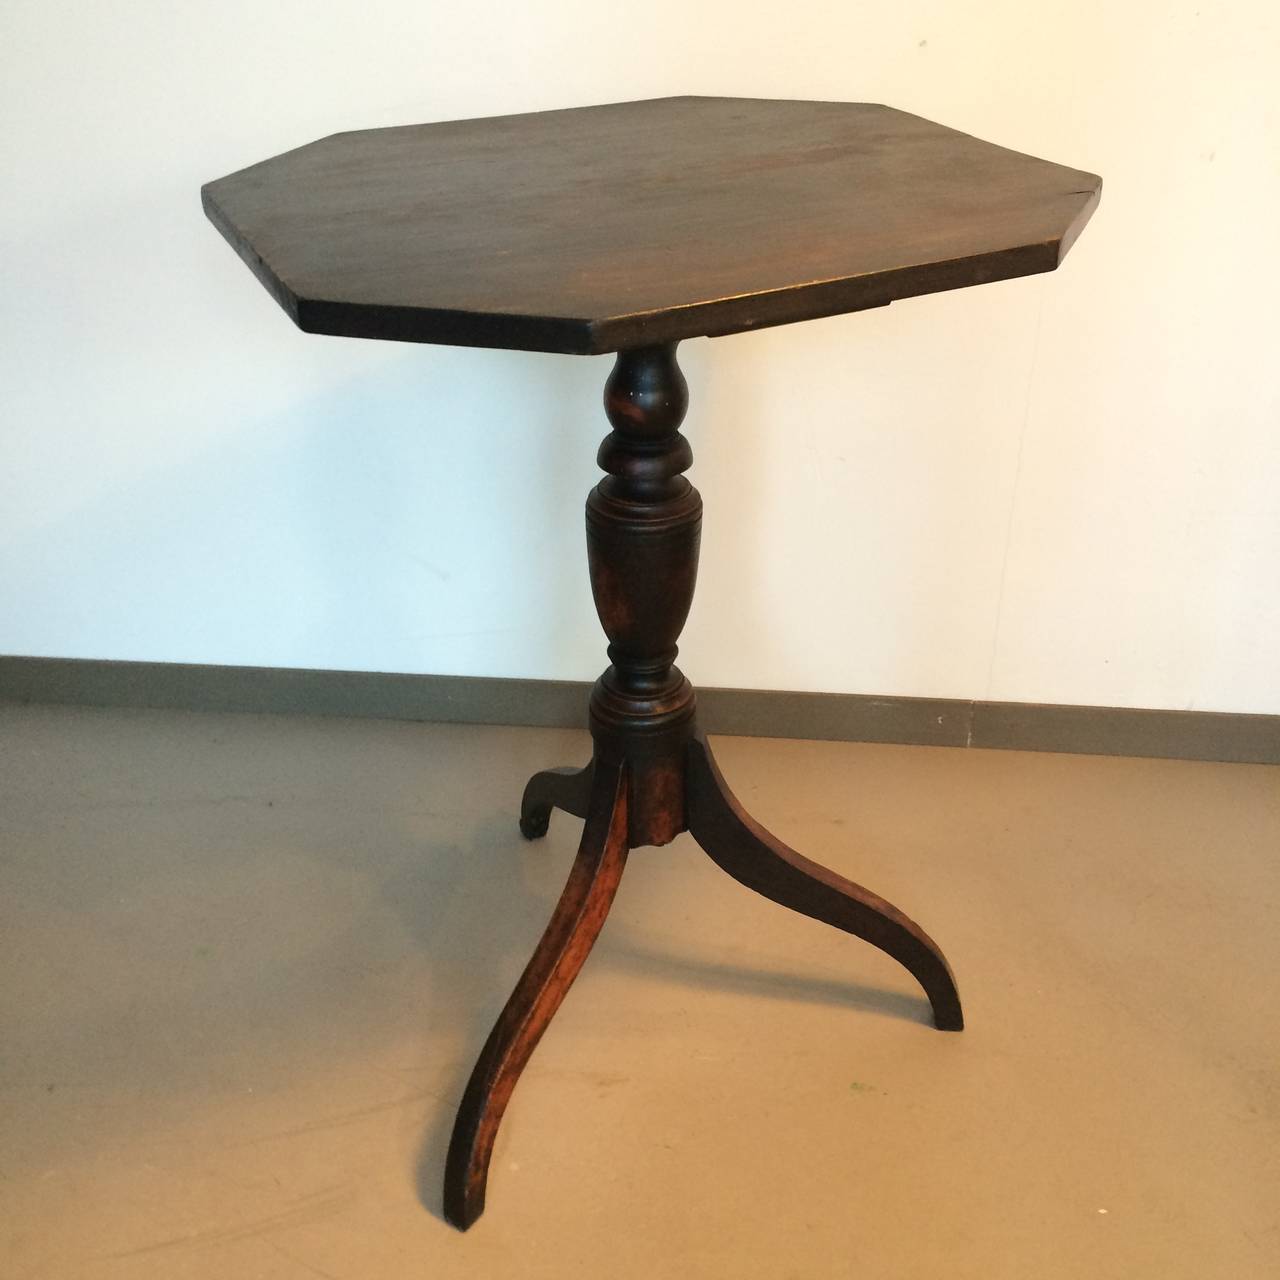 A single tripod foot Federal candle stand or side table with beautifully proportioned urn and pear turnings atop graceful spider legs. Retains a great old dark finish.